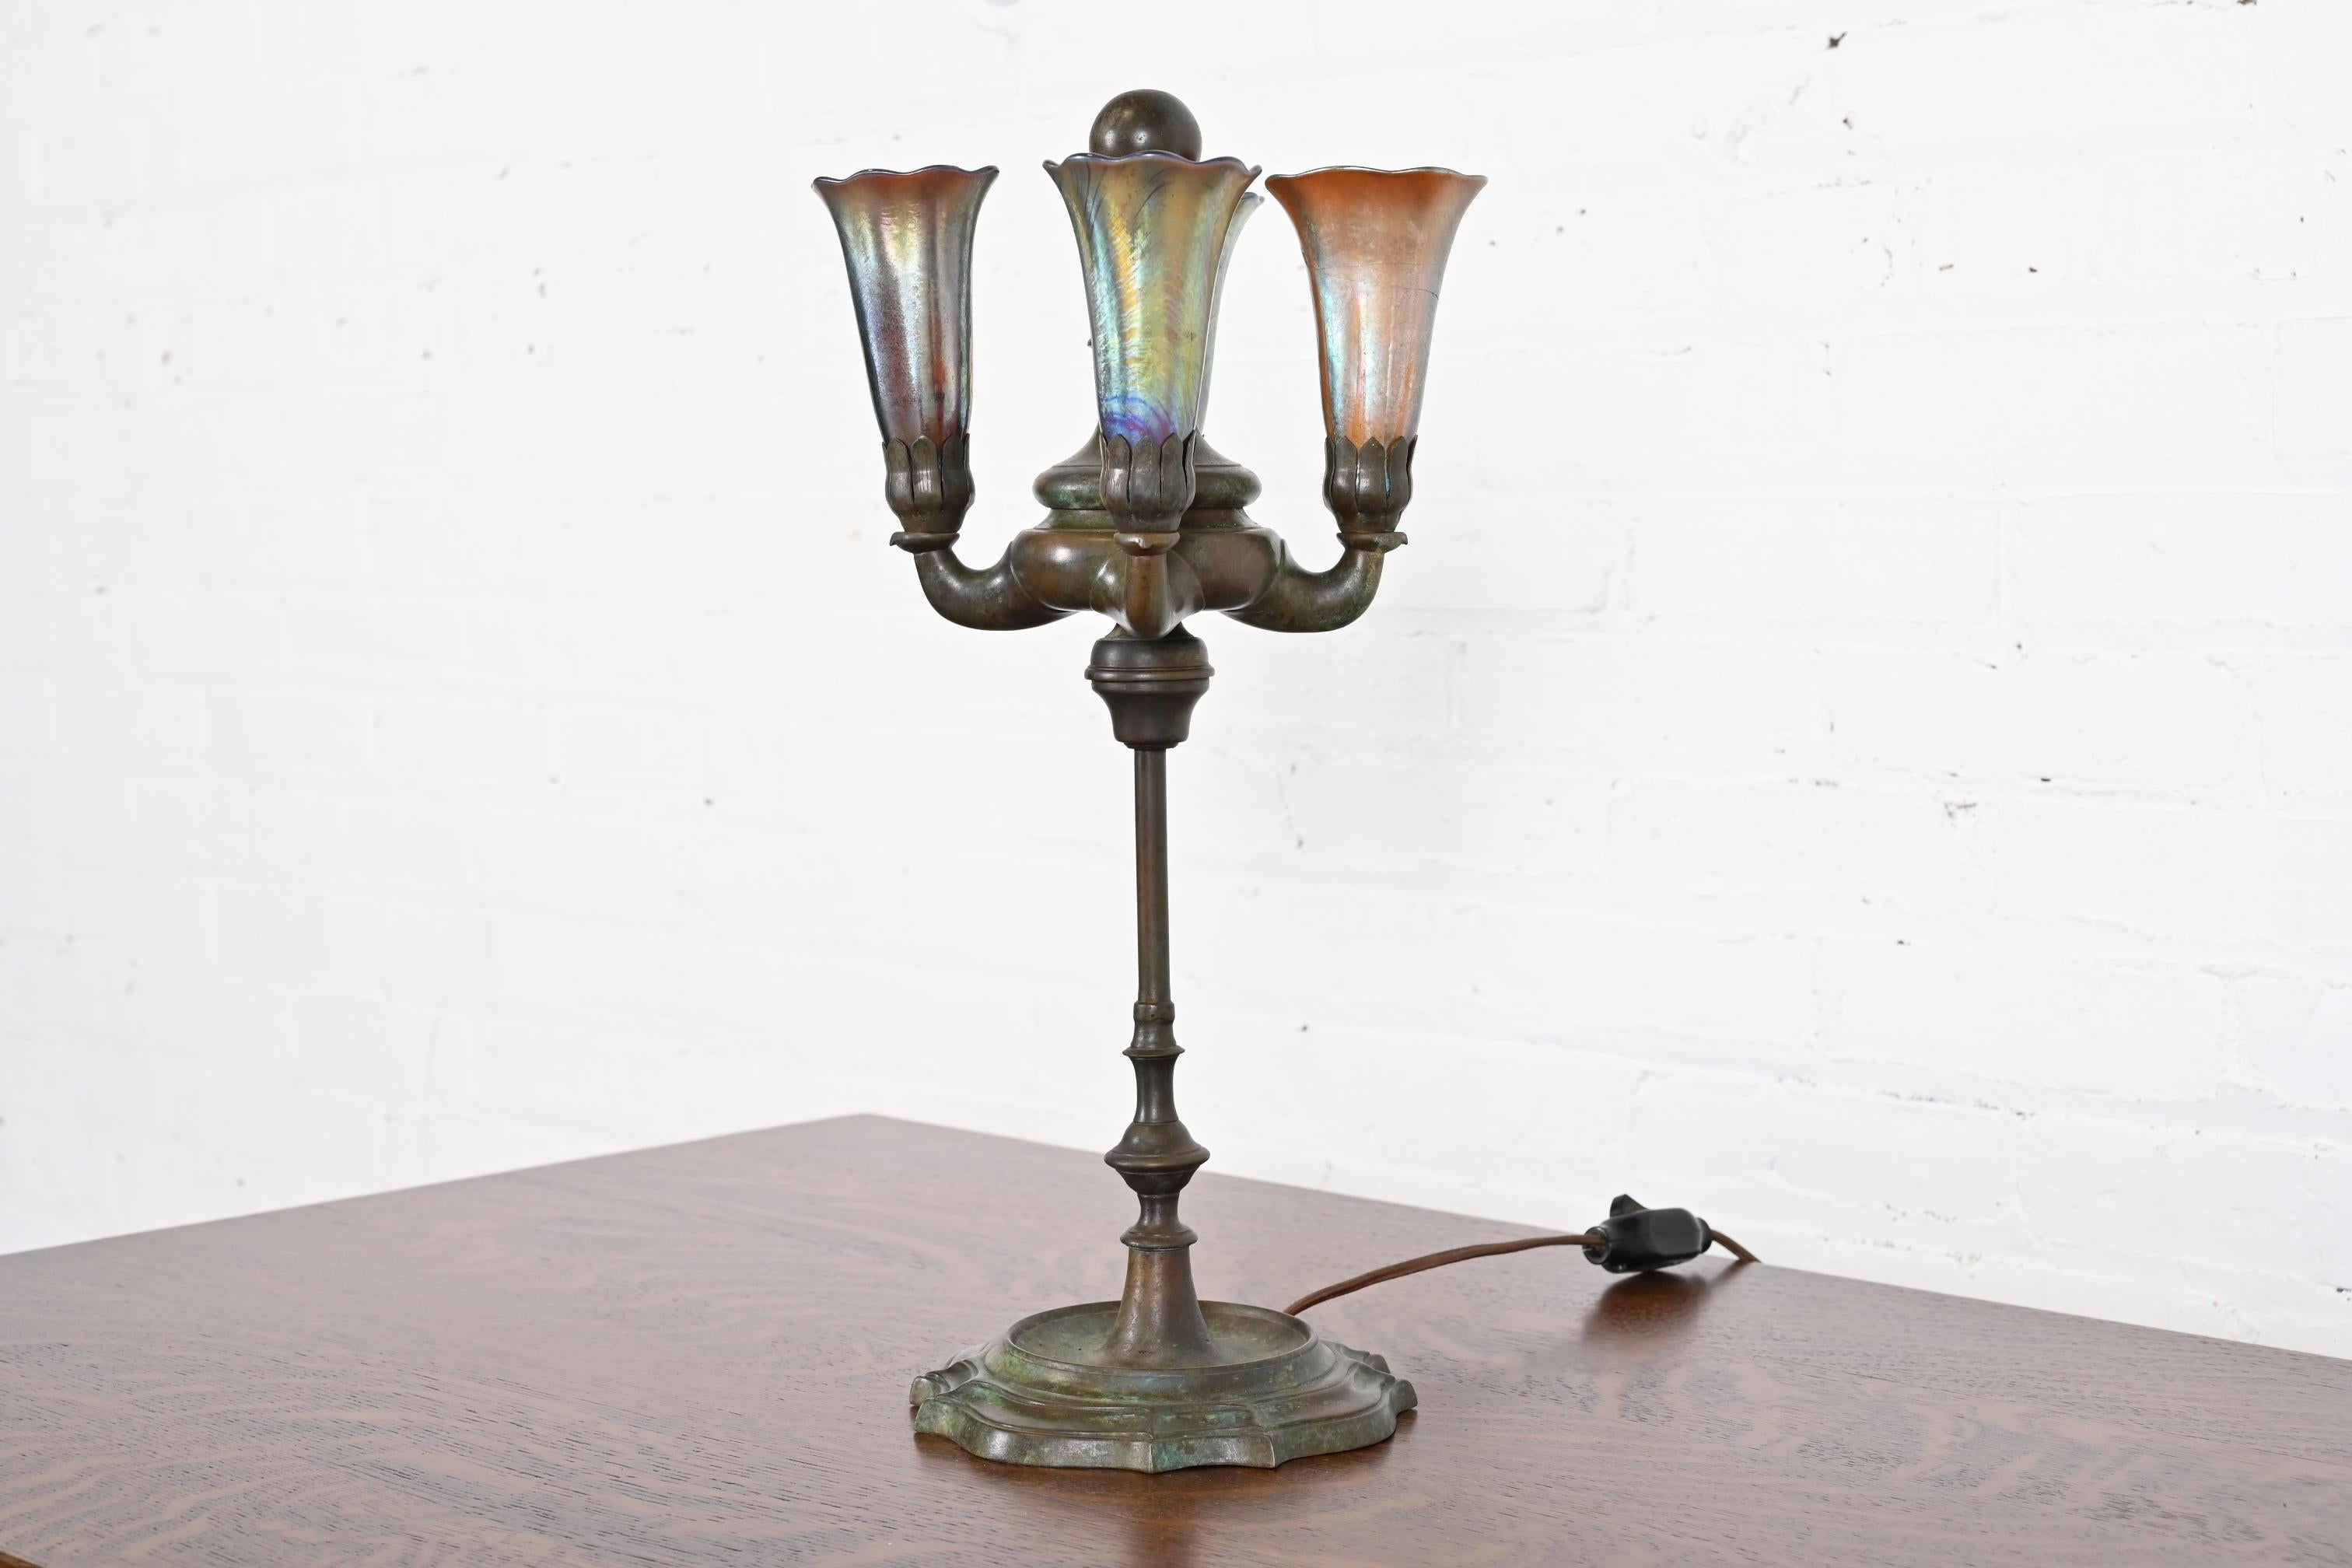 Tiffany Studios New York Bronze Four-Light Table Lamp With Favrile Glass Shades 1